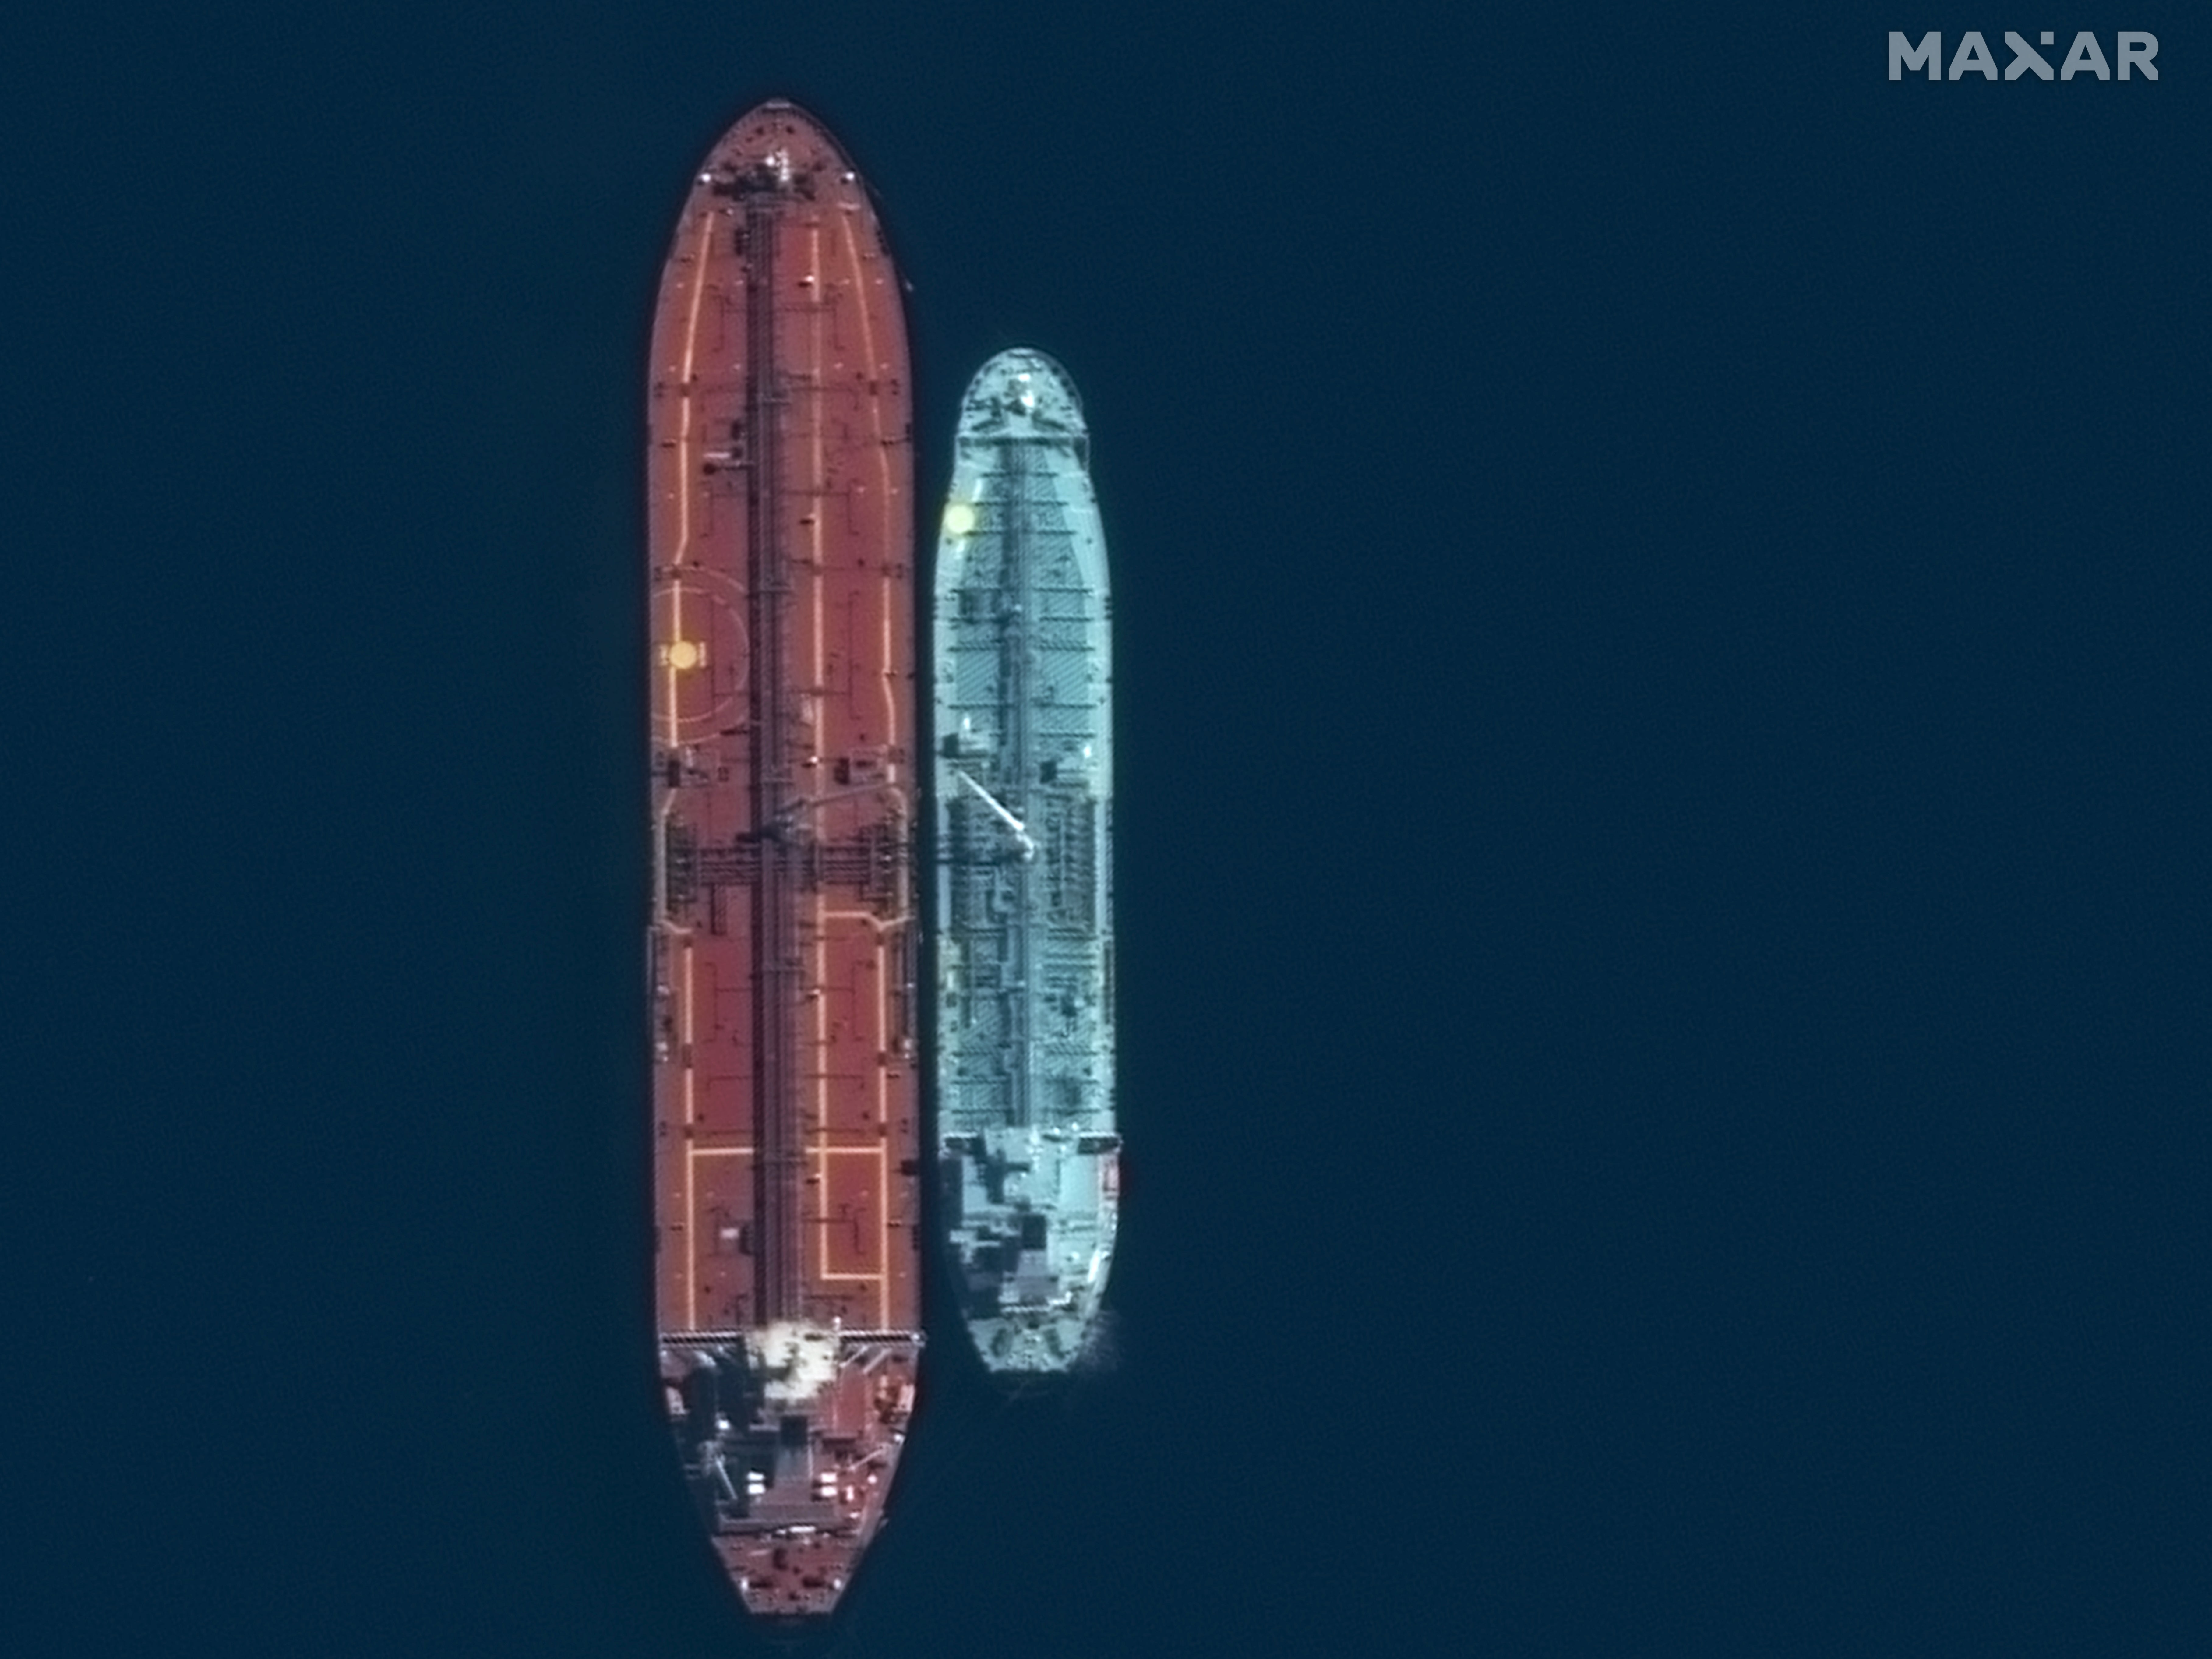 A satellite image taken on 20 March 2023 by Maxar Technologies shows a ship-to-ship transfer in Lakonikos Bay